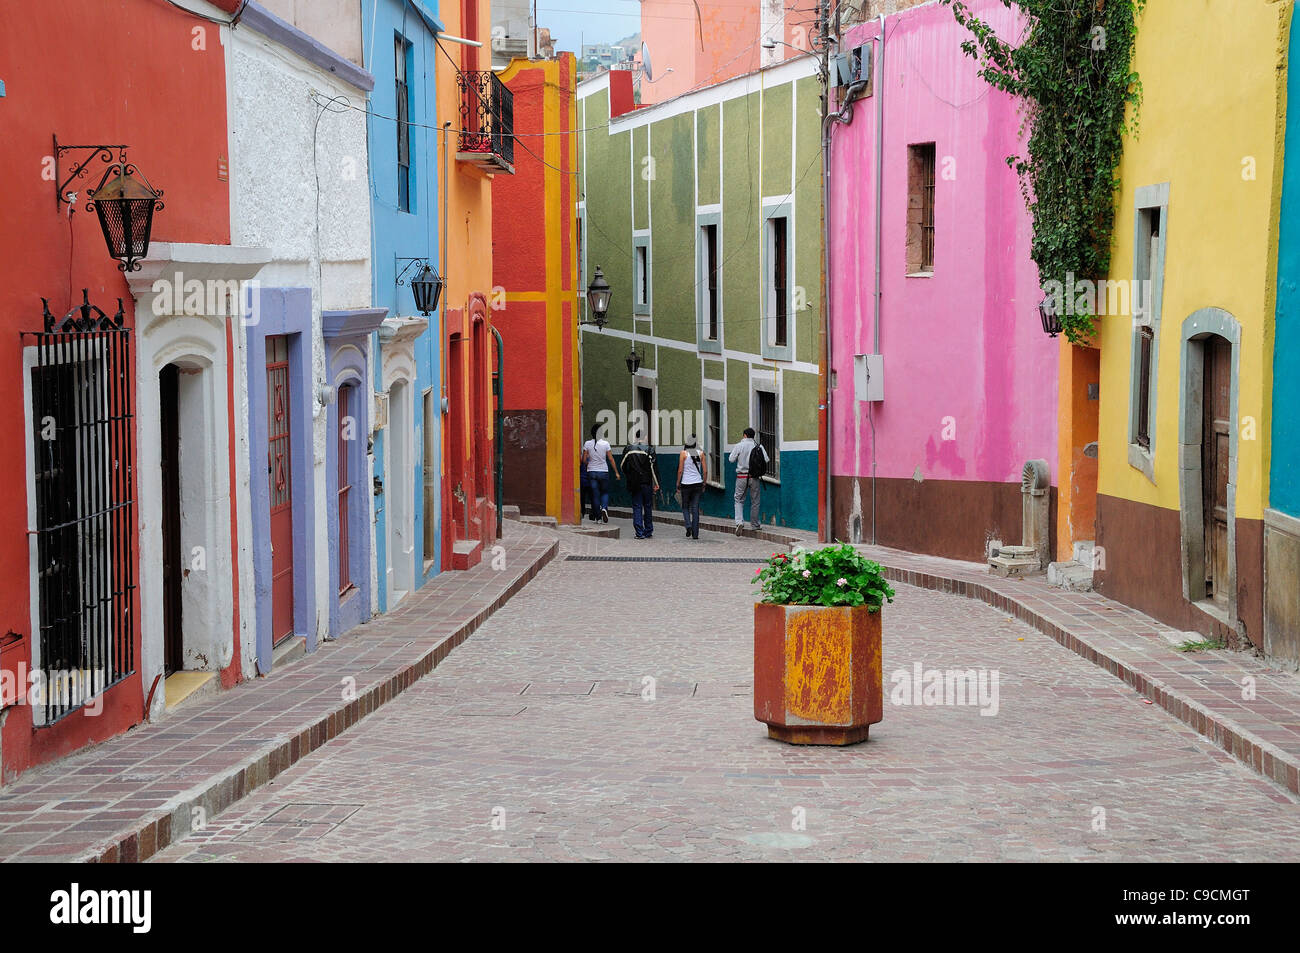 Mexico, Bajio, Guanajuato, Paved street lined by colourfully painted houses, group of four people walking at far end and Stock Photo